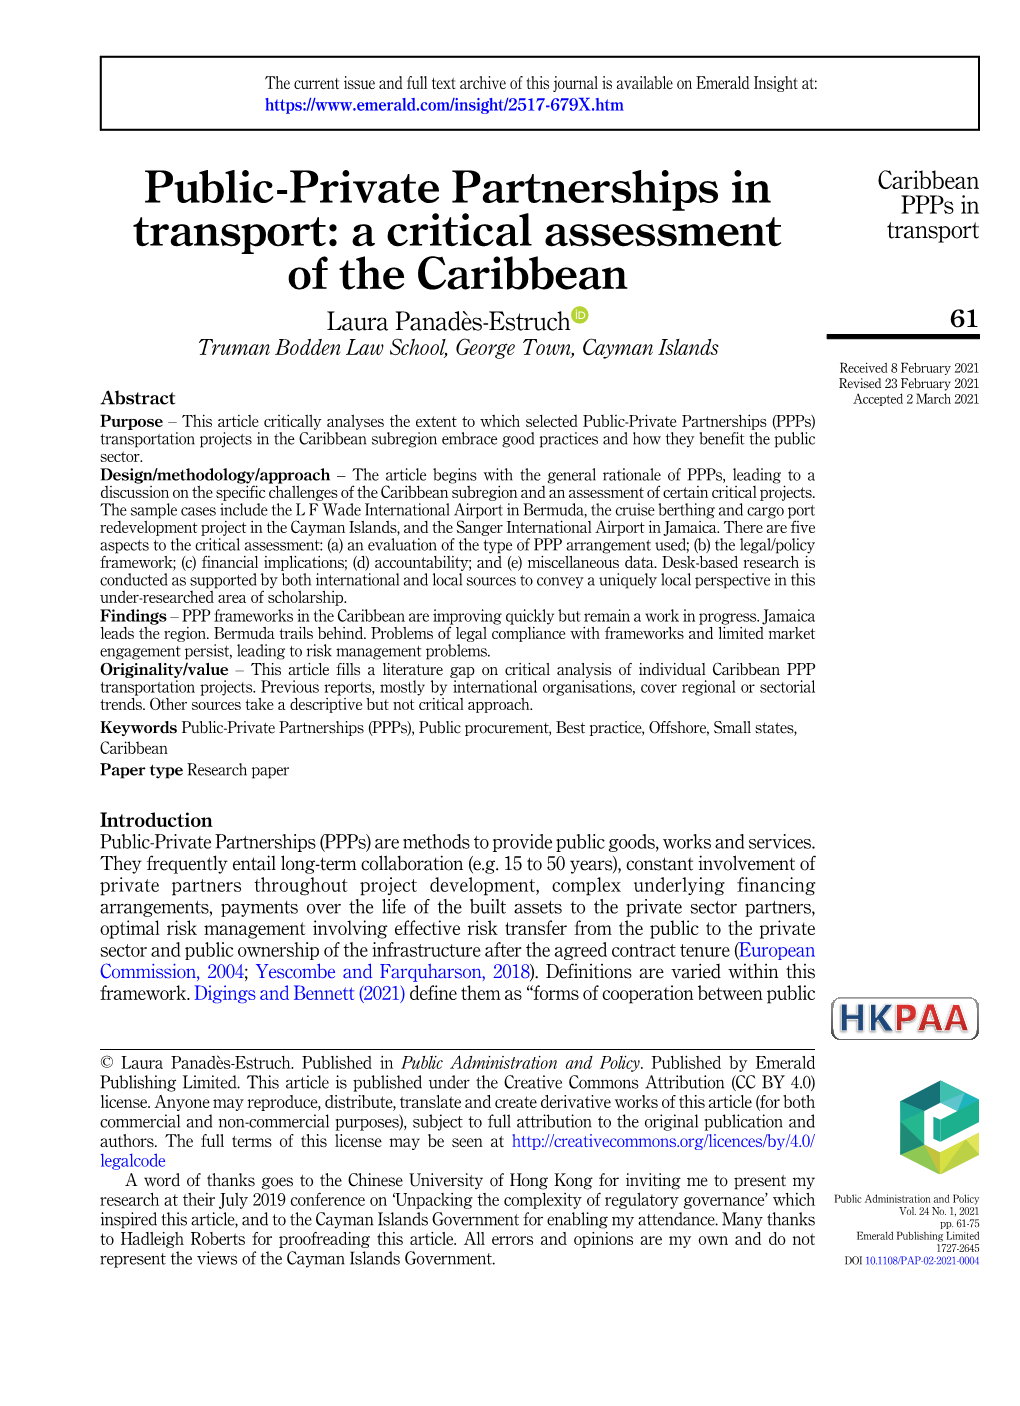 Public-Private Partnerships in Transport: a Critical Assessment Of